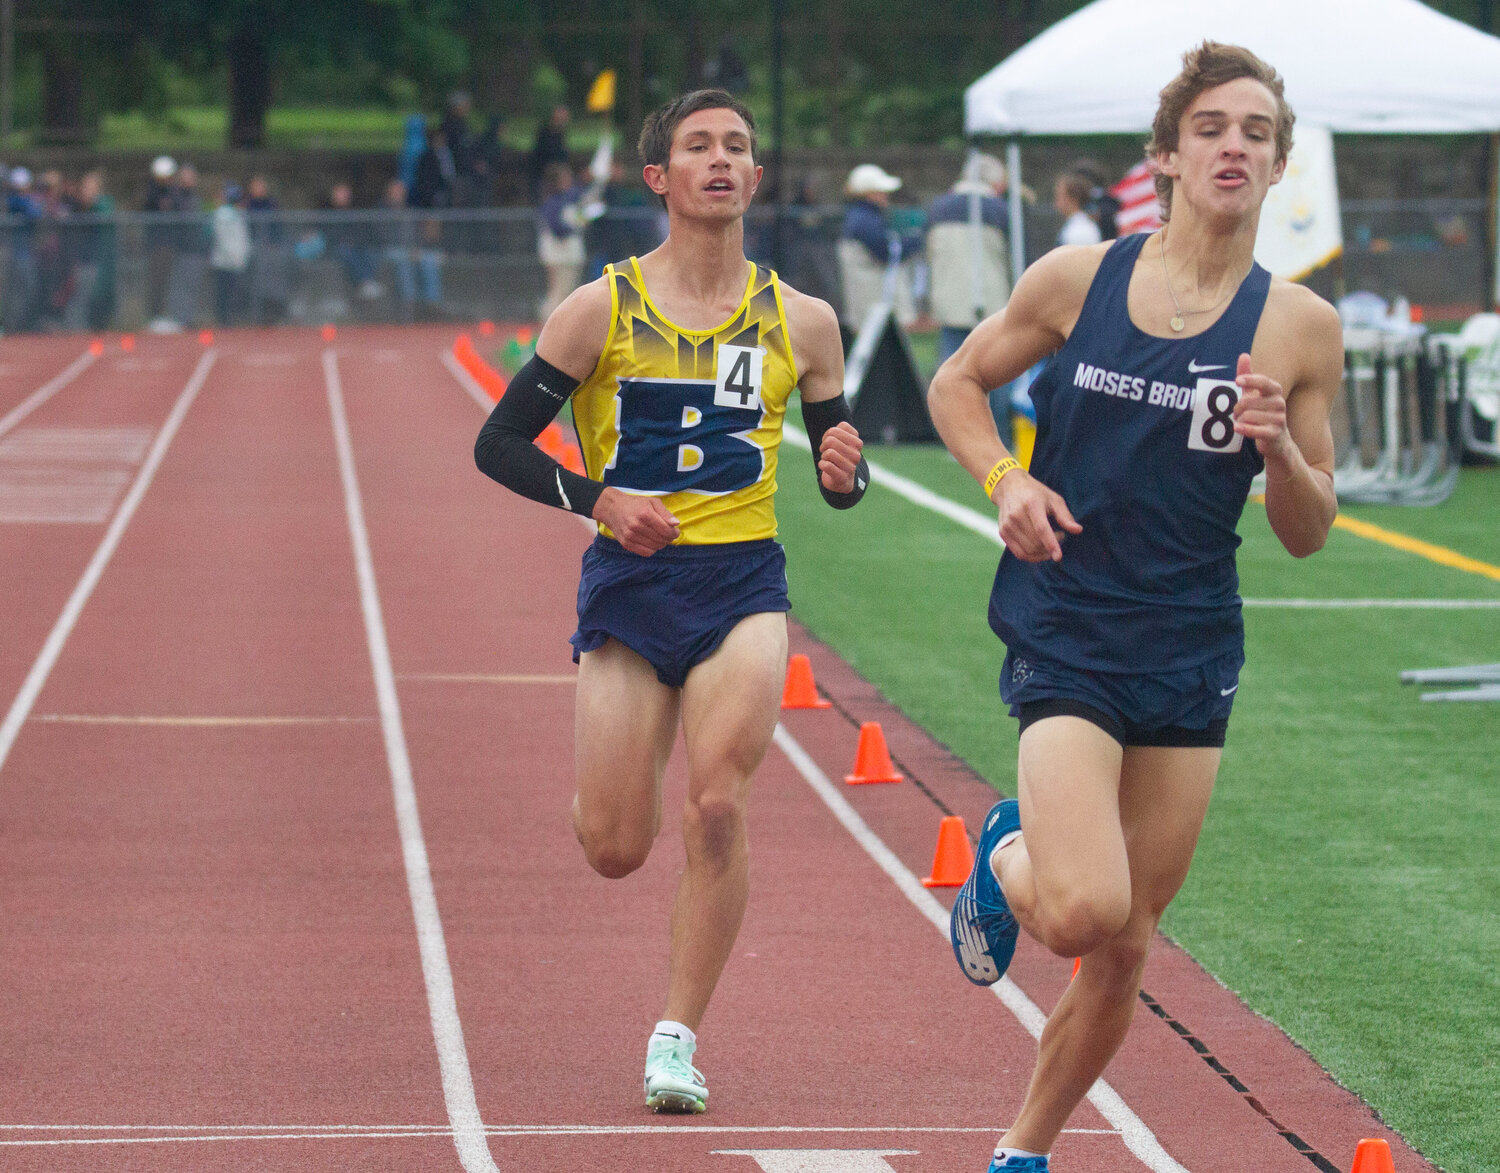 Barrington's Charlie Stockwell (left) competes in the 1,500-meter race at the state track meet.